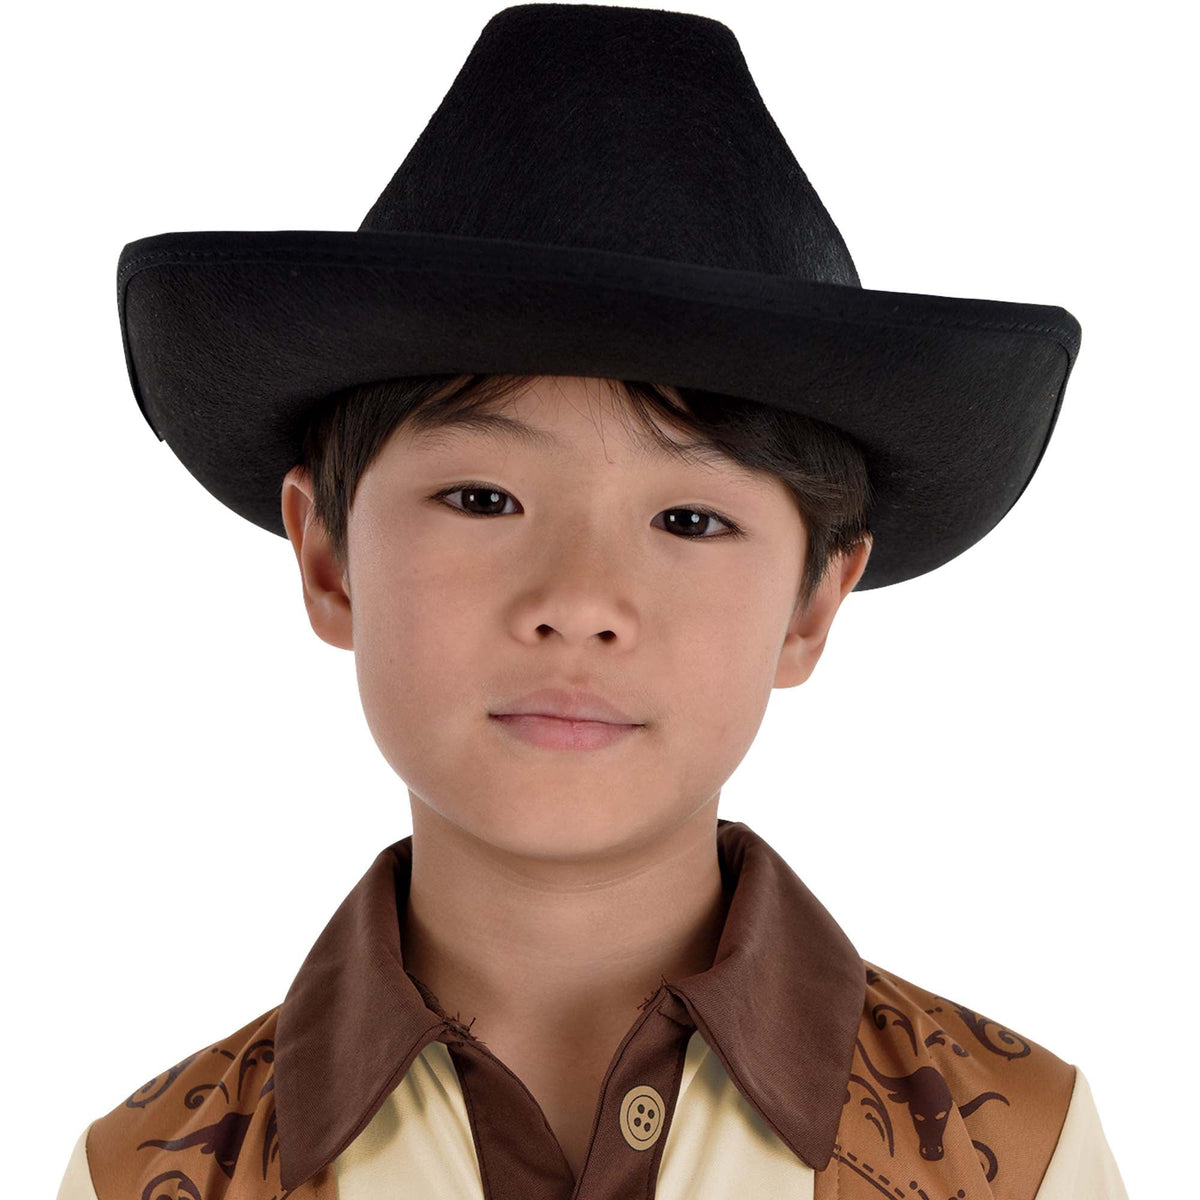 HALLOWEEN COSTUME CO. Costume Accessories Black Western Cowboy Hat for Kids